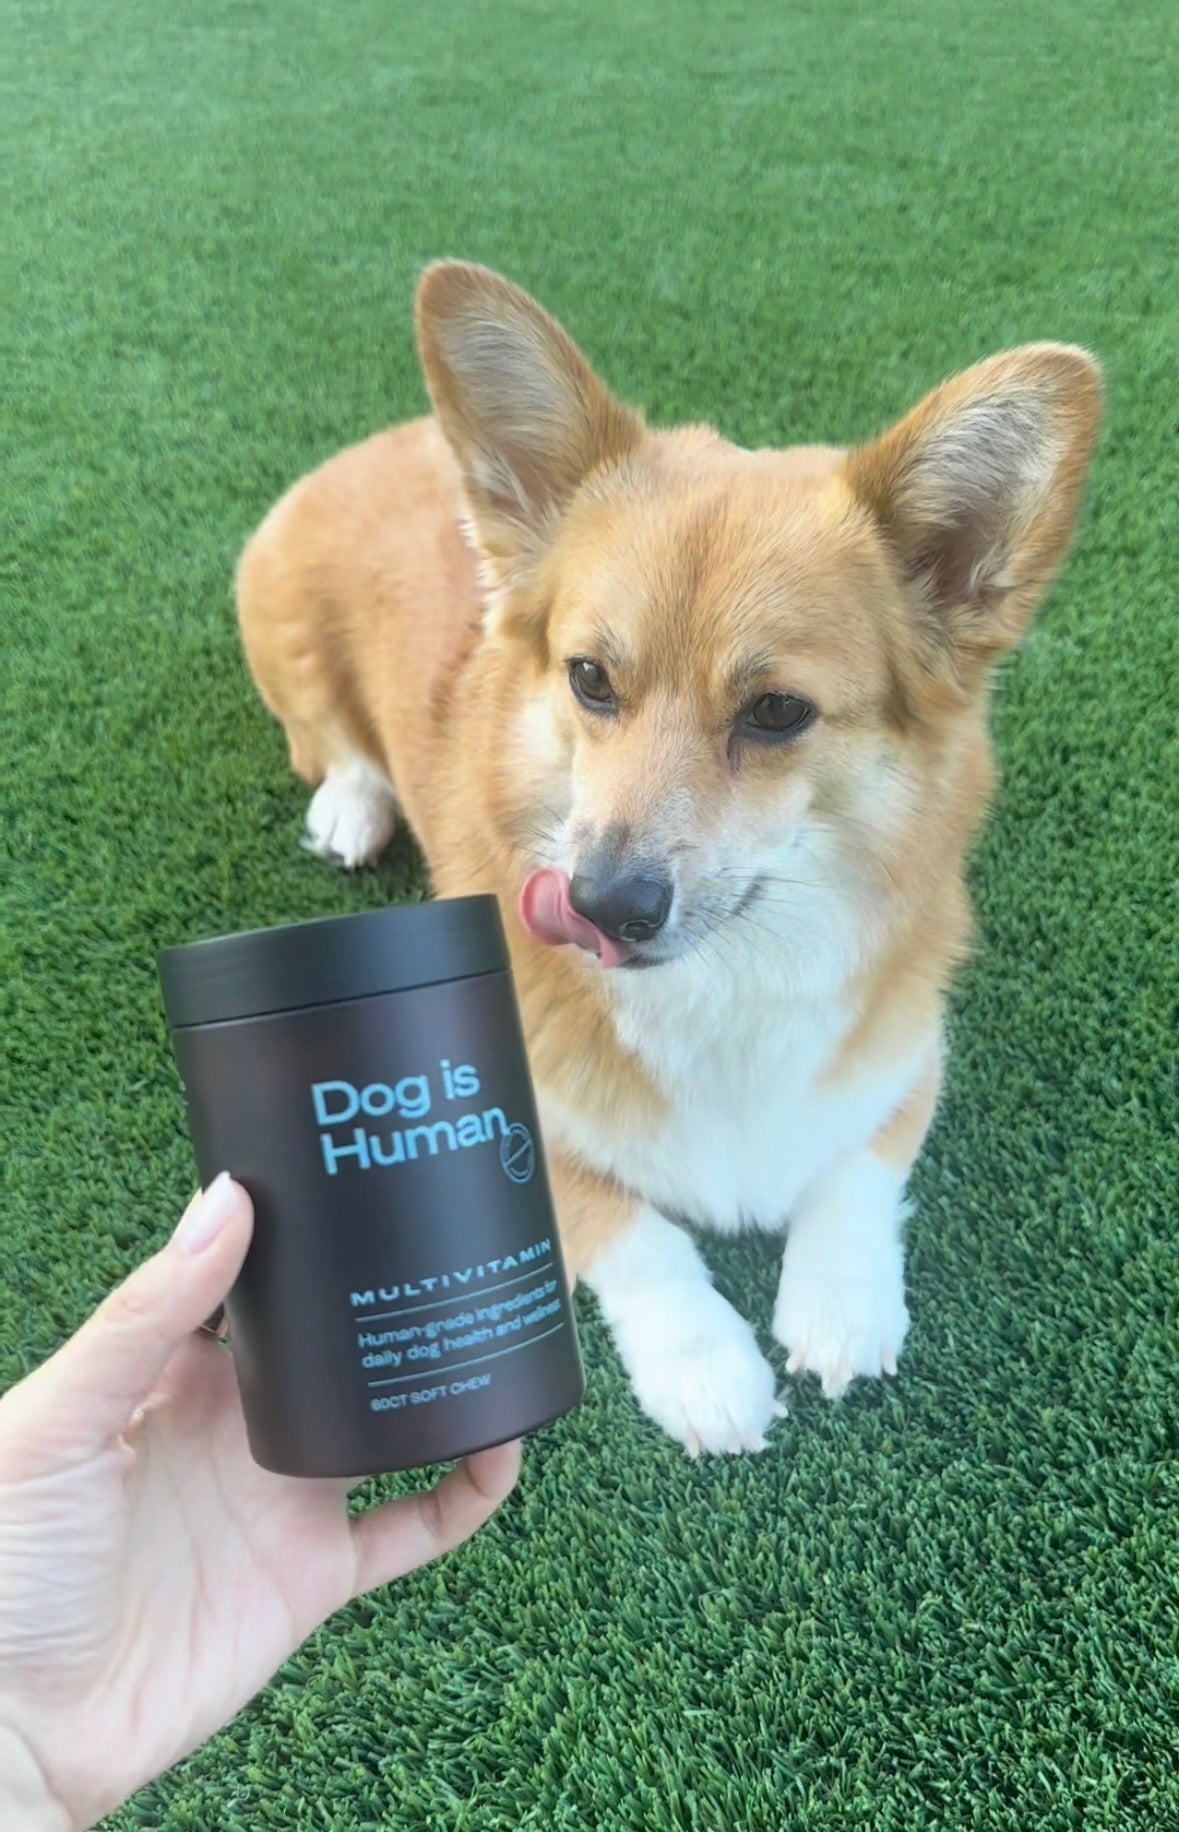 A Corgi sits on grass. The Corgi licks its lips as it looks at the jar of pet multivitamins the offscreen owner is holding. 